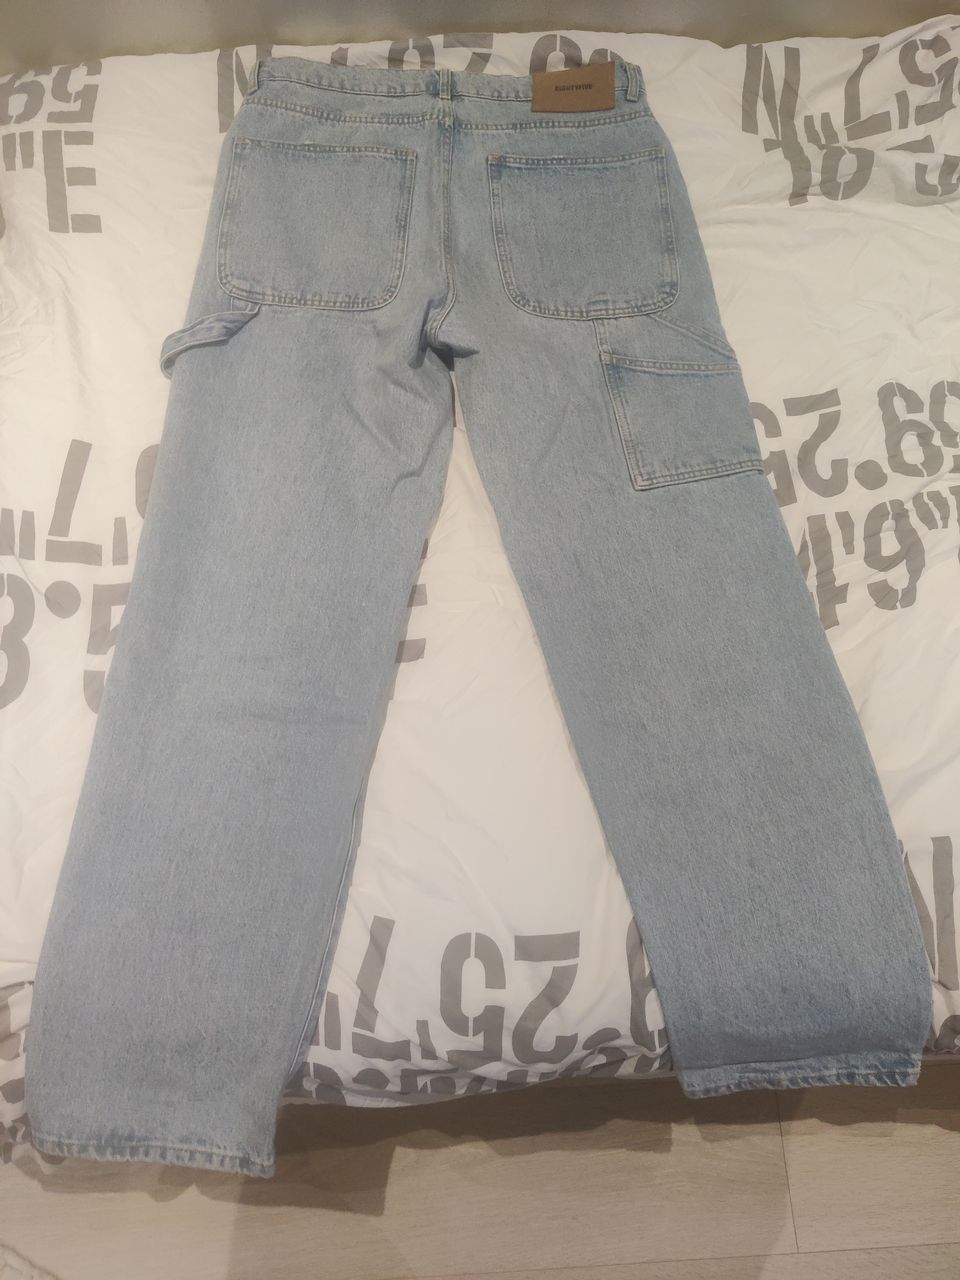 EightyFive Baggy Jeans with Loop